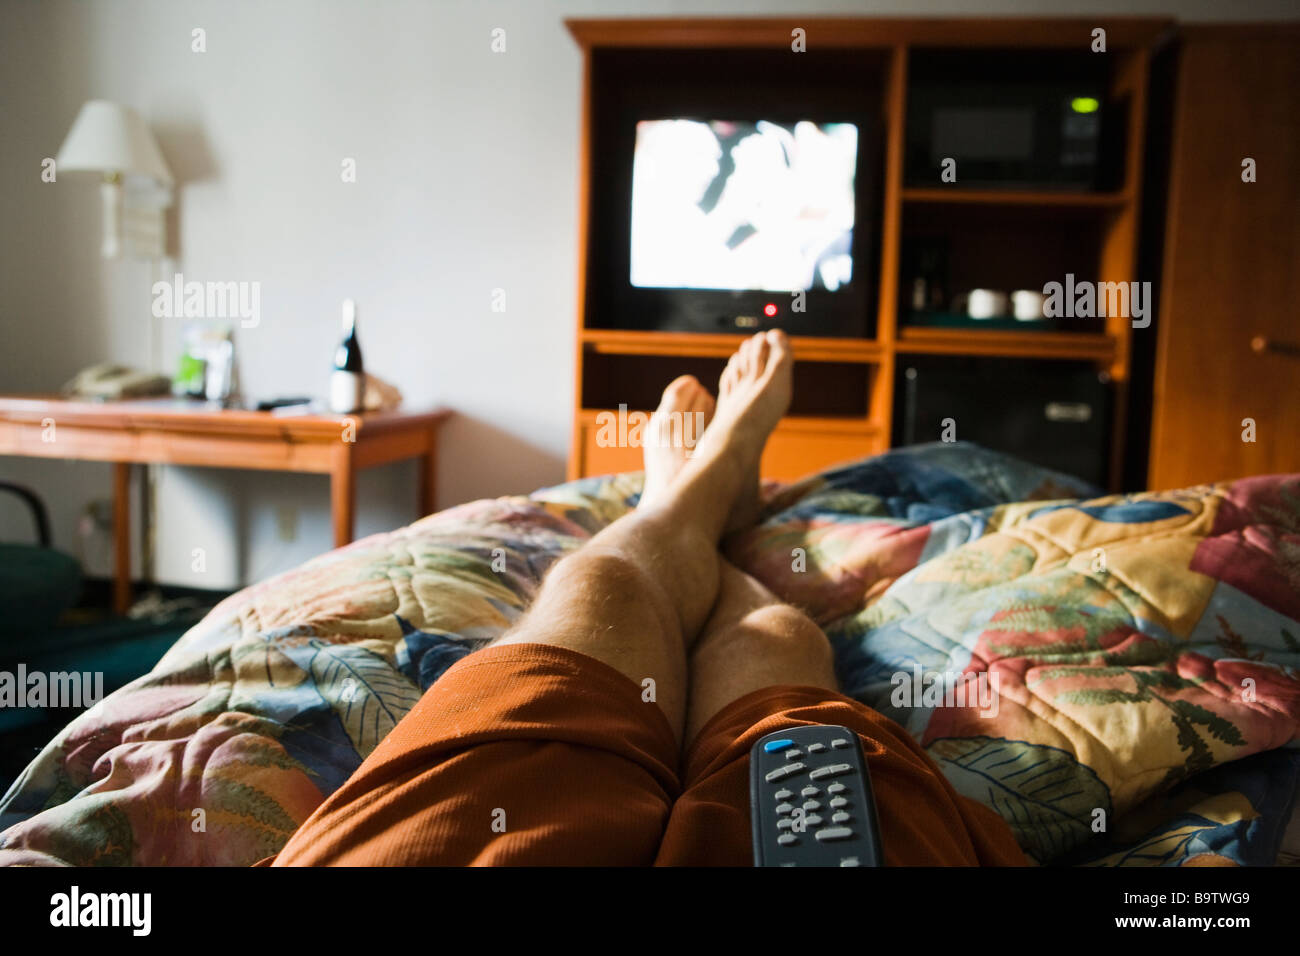 A first peson view of a mans legs relaxing on a bed in a hotel room watching the TV with a remote control on his lap Stock Photo